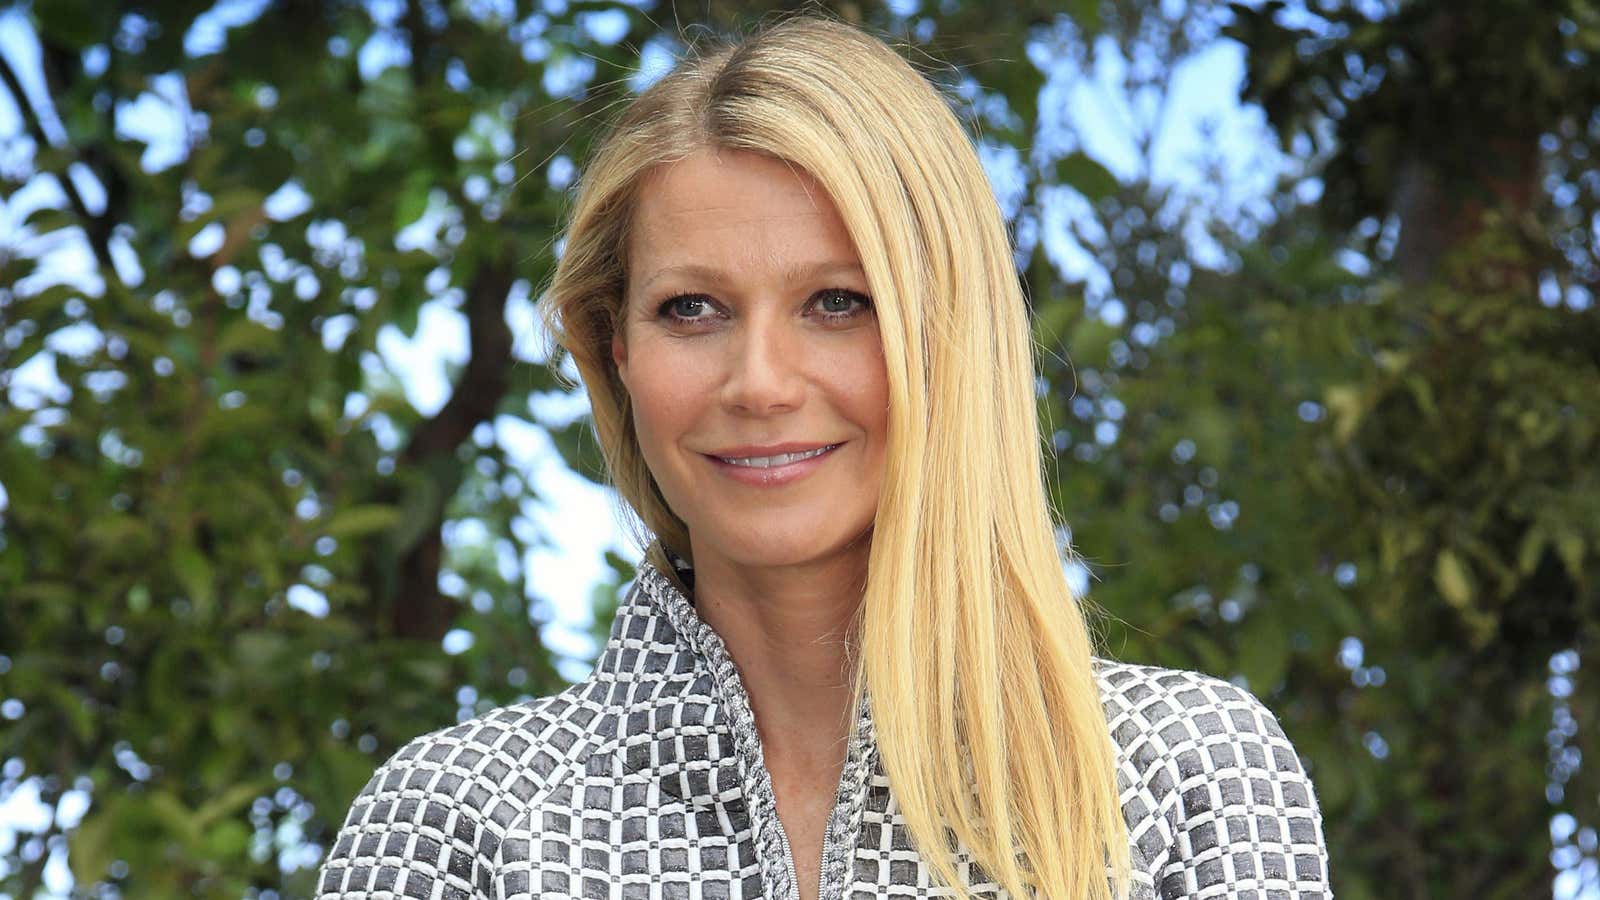 Gwyneth Paltrow workout: how to get the Goop founder's abs after